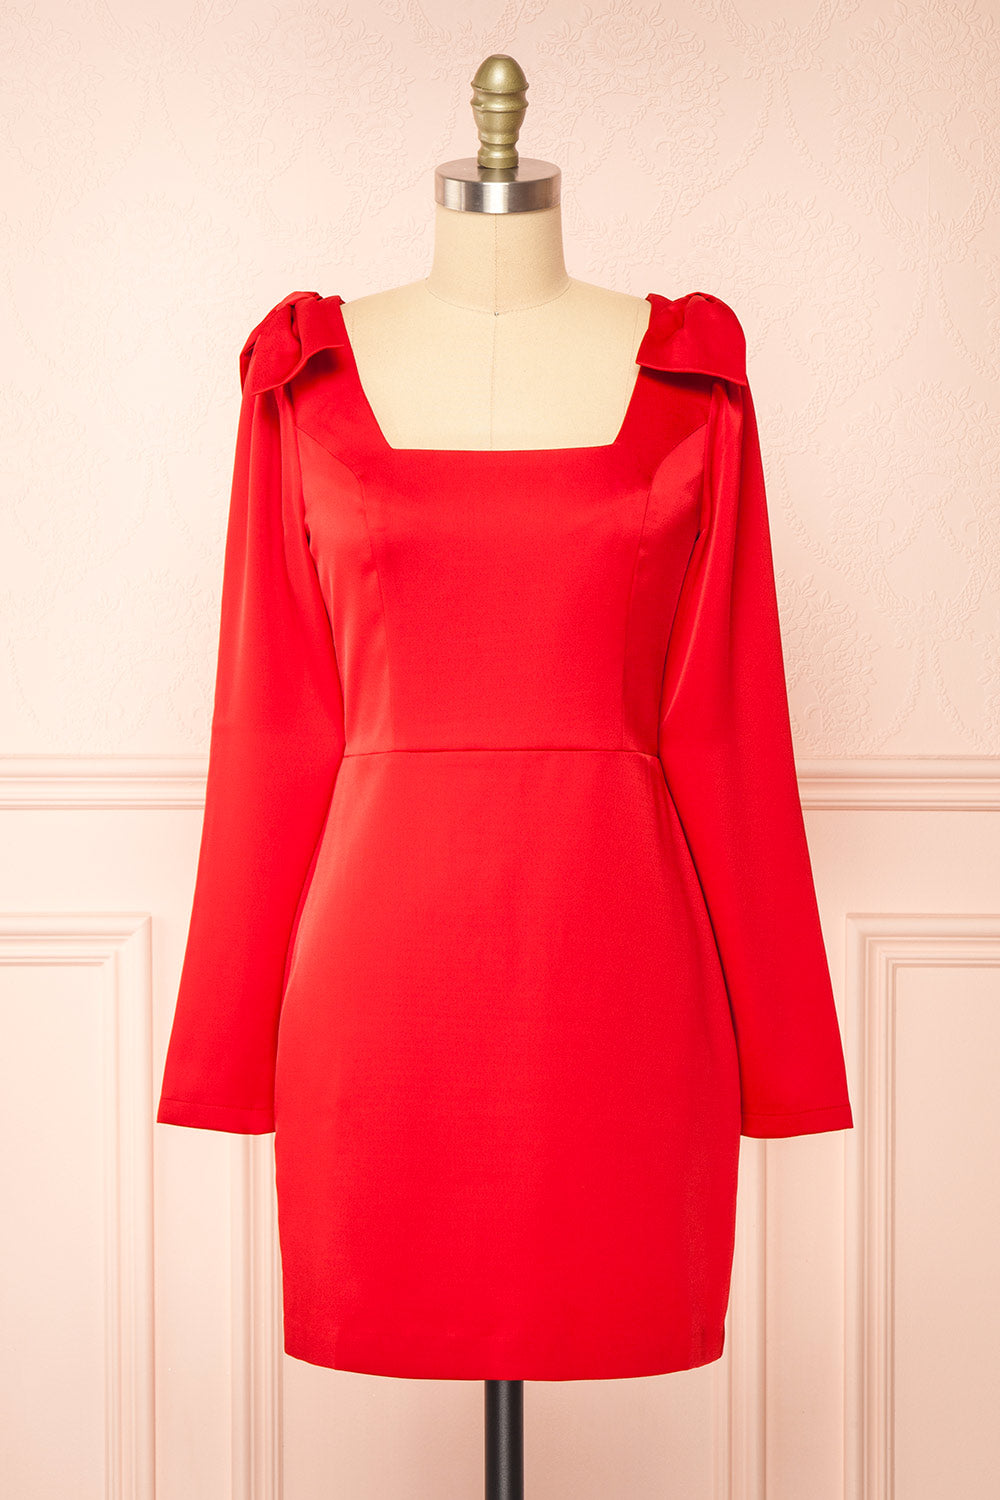 Isalie Short Silky Red Dress w/ Bows | Boutique 1861 front view